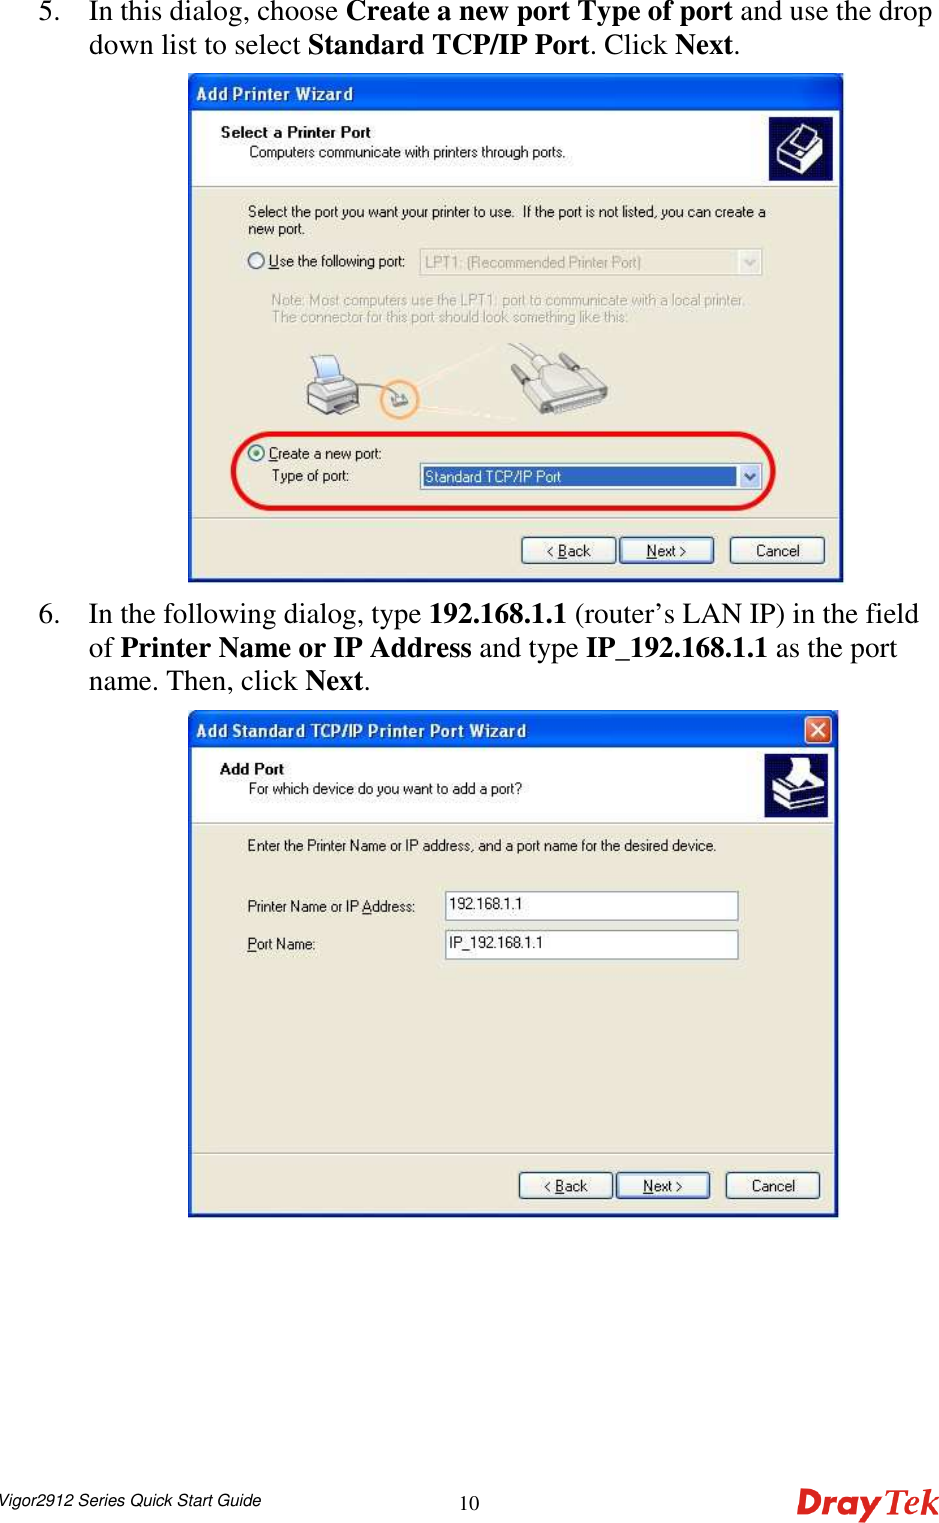  Vigor2912 Series Quick Start Guide 105. In this dialog, choose Create a new port Type of port and use the drop down list to select Standard TCP/IP Port. Click Next.  6. In the following dialog, type 192.168.1.1 (router’s LAN IP) in the field of Printer Name or IP Address and type IP_192.168.1.1 as the port name. Then, click Next.  